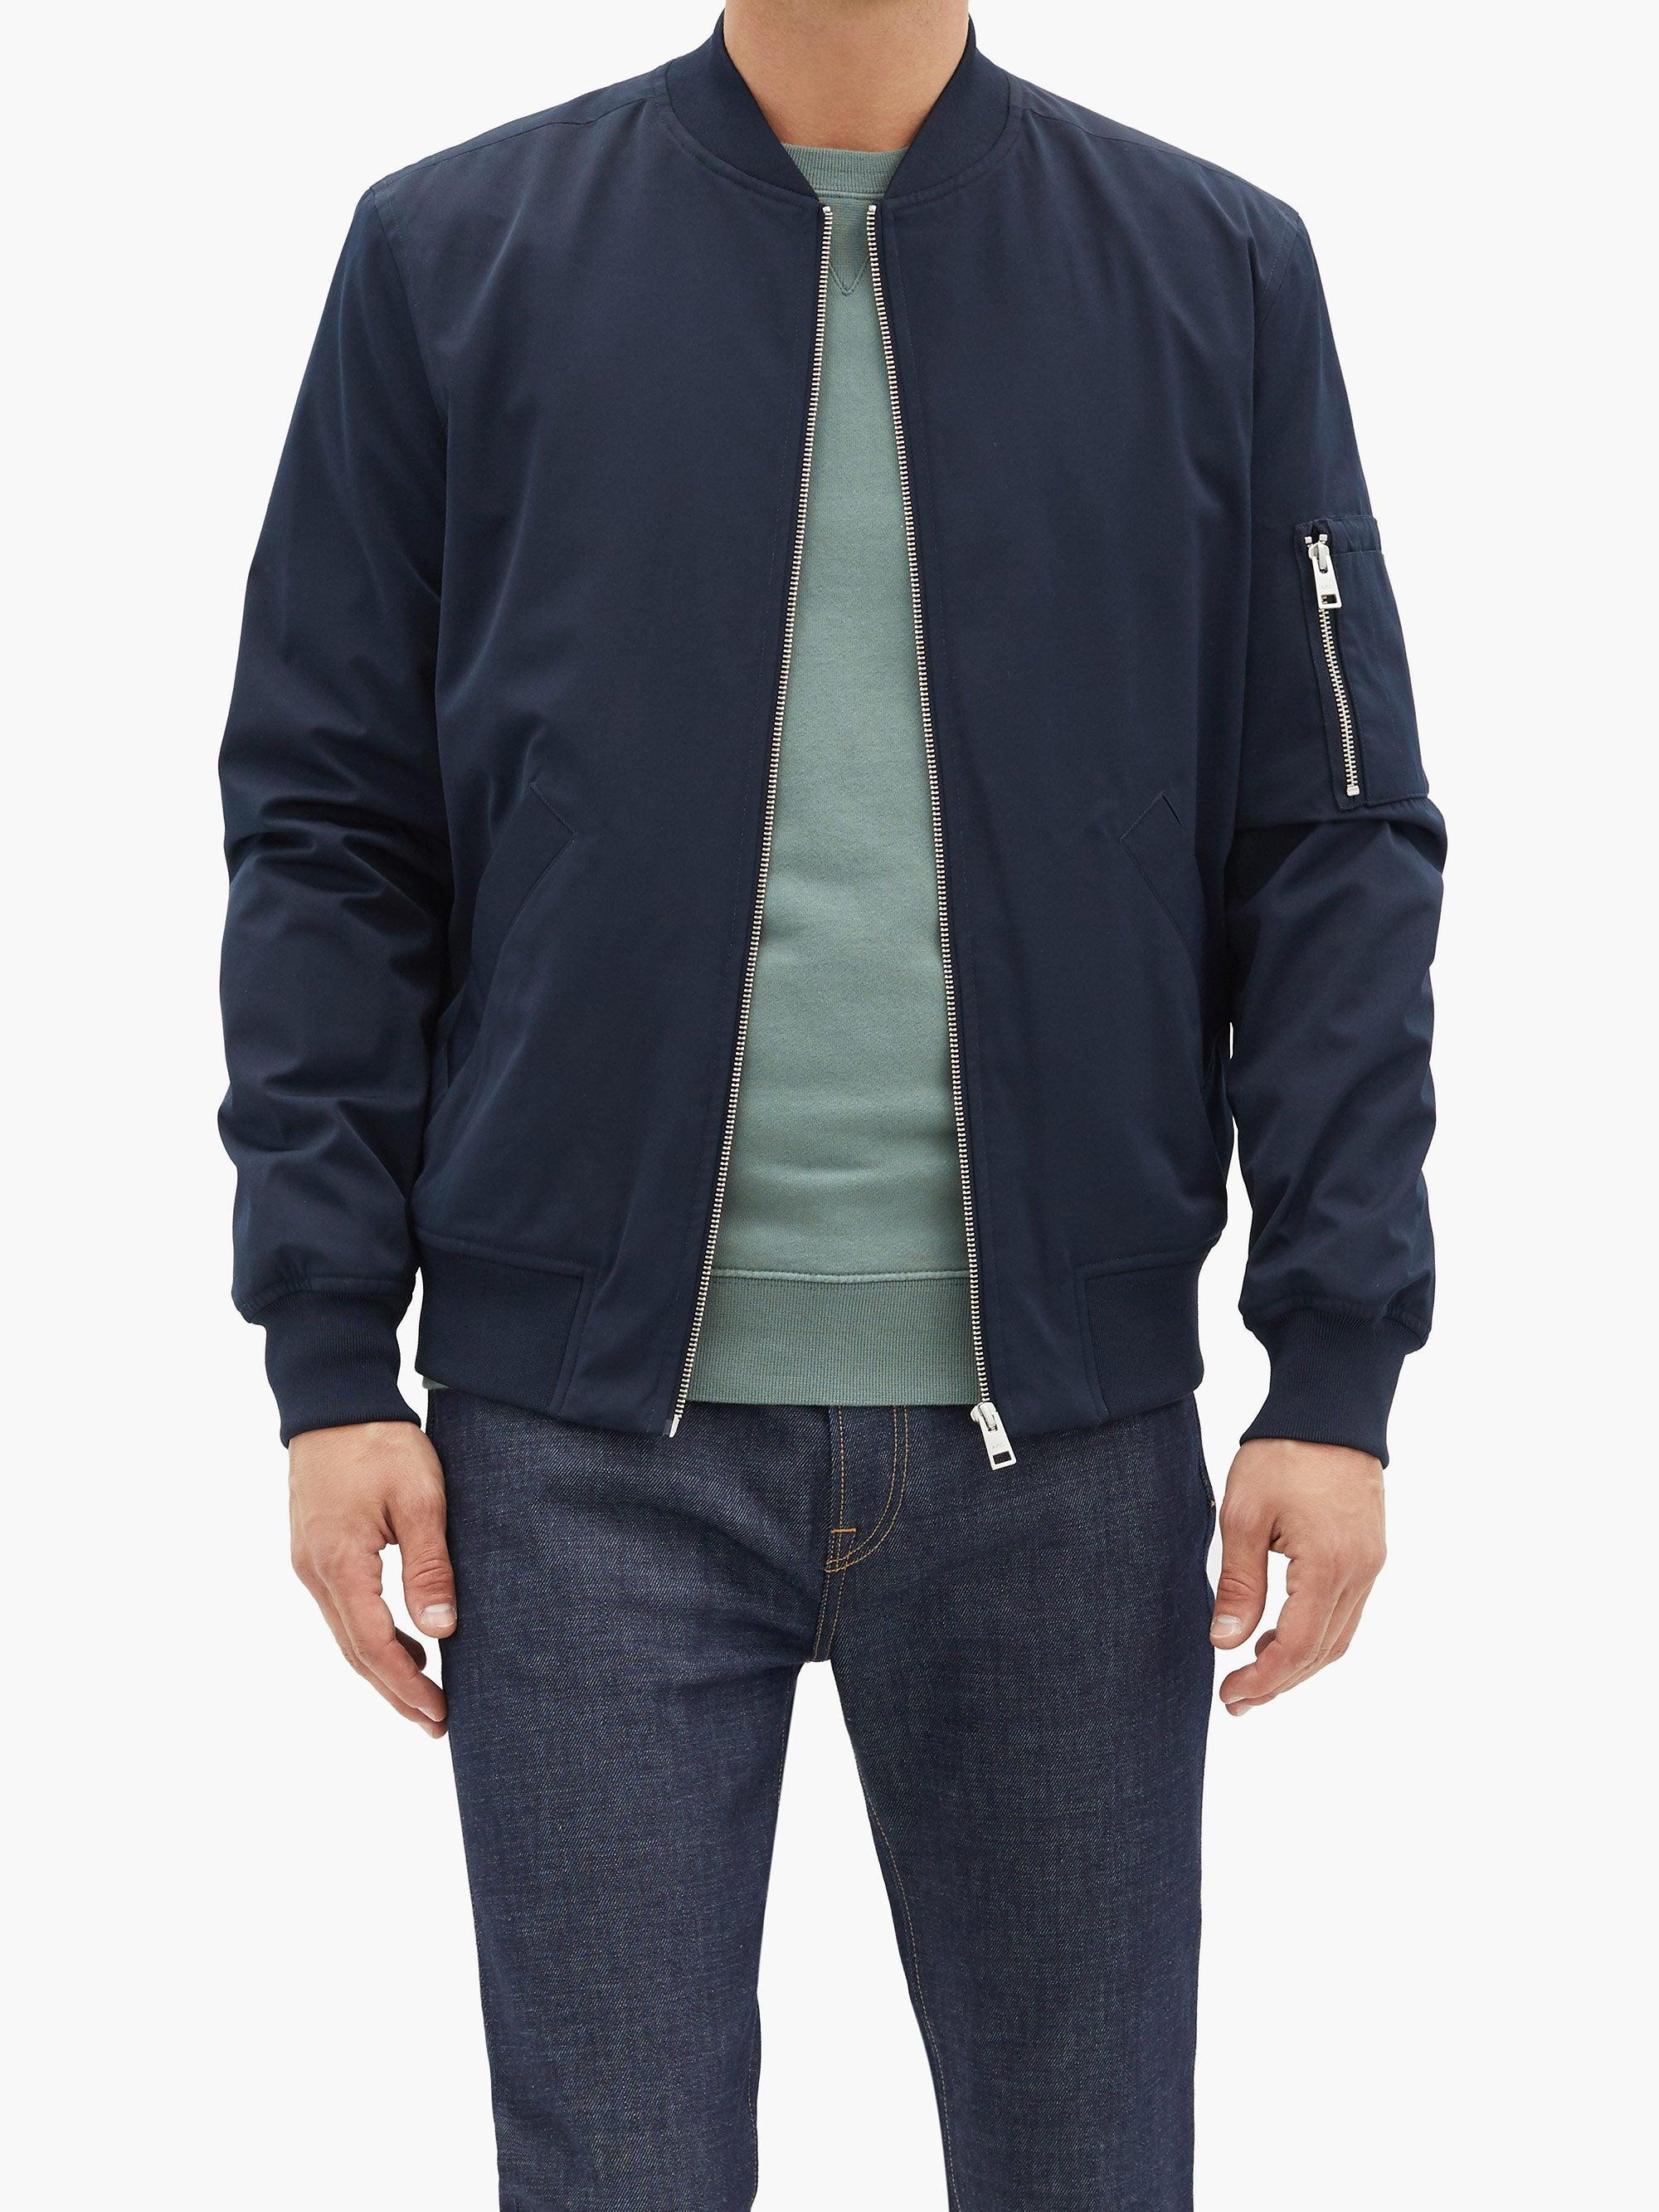 A.P.C. Cotton Ma-1 Padded Bomber Jacket in Navy (Blue) for Men - Lyst